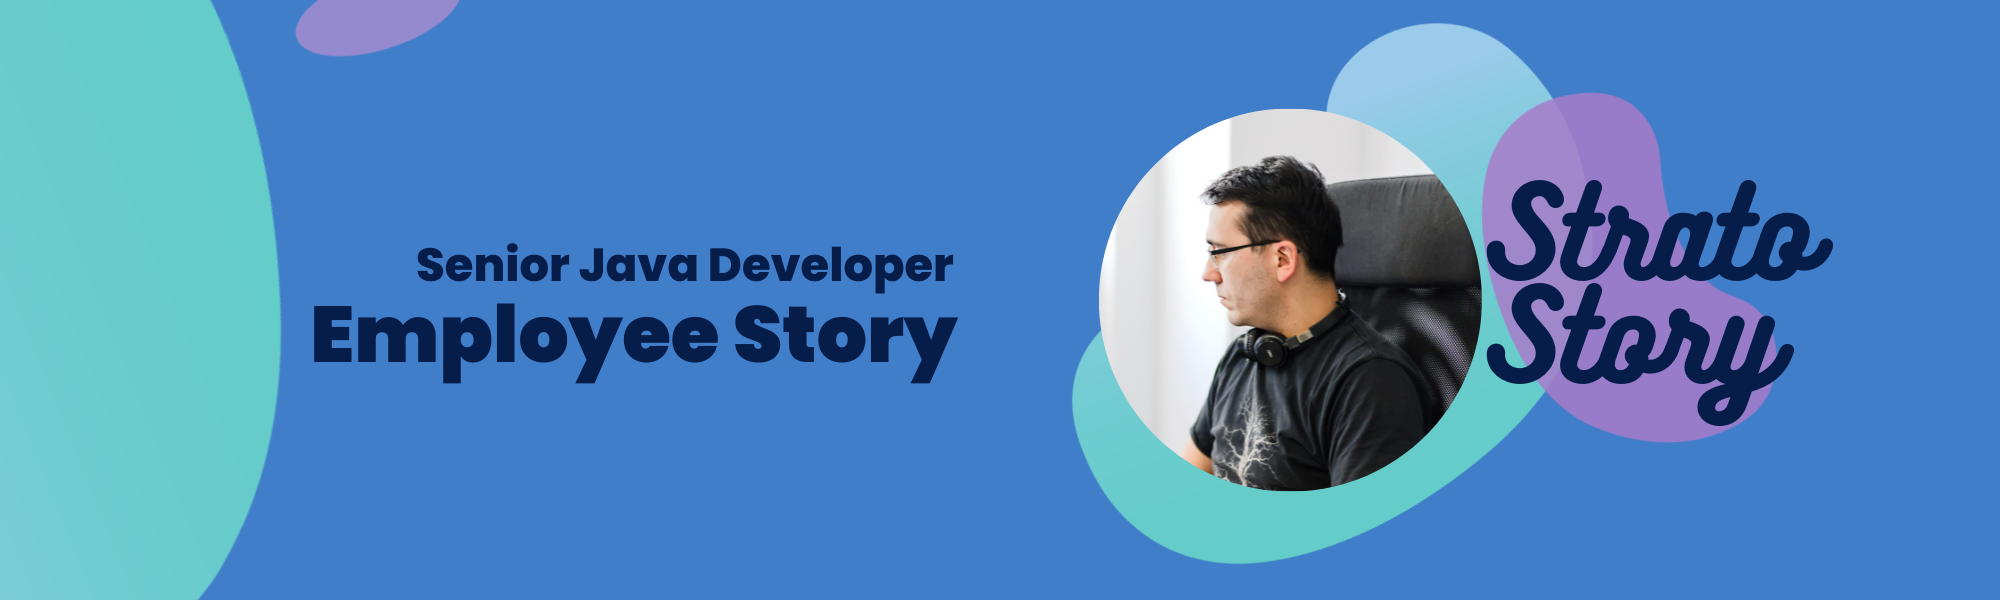 He has been programming for 16 years and willingly shares his knowledge with people who are just entering the IT market. As part of StratoStory, our s